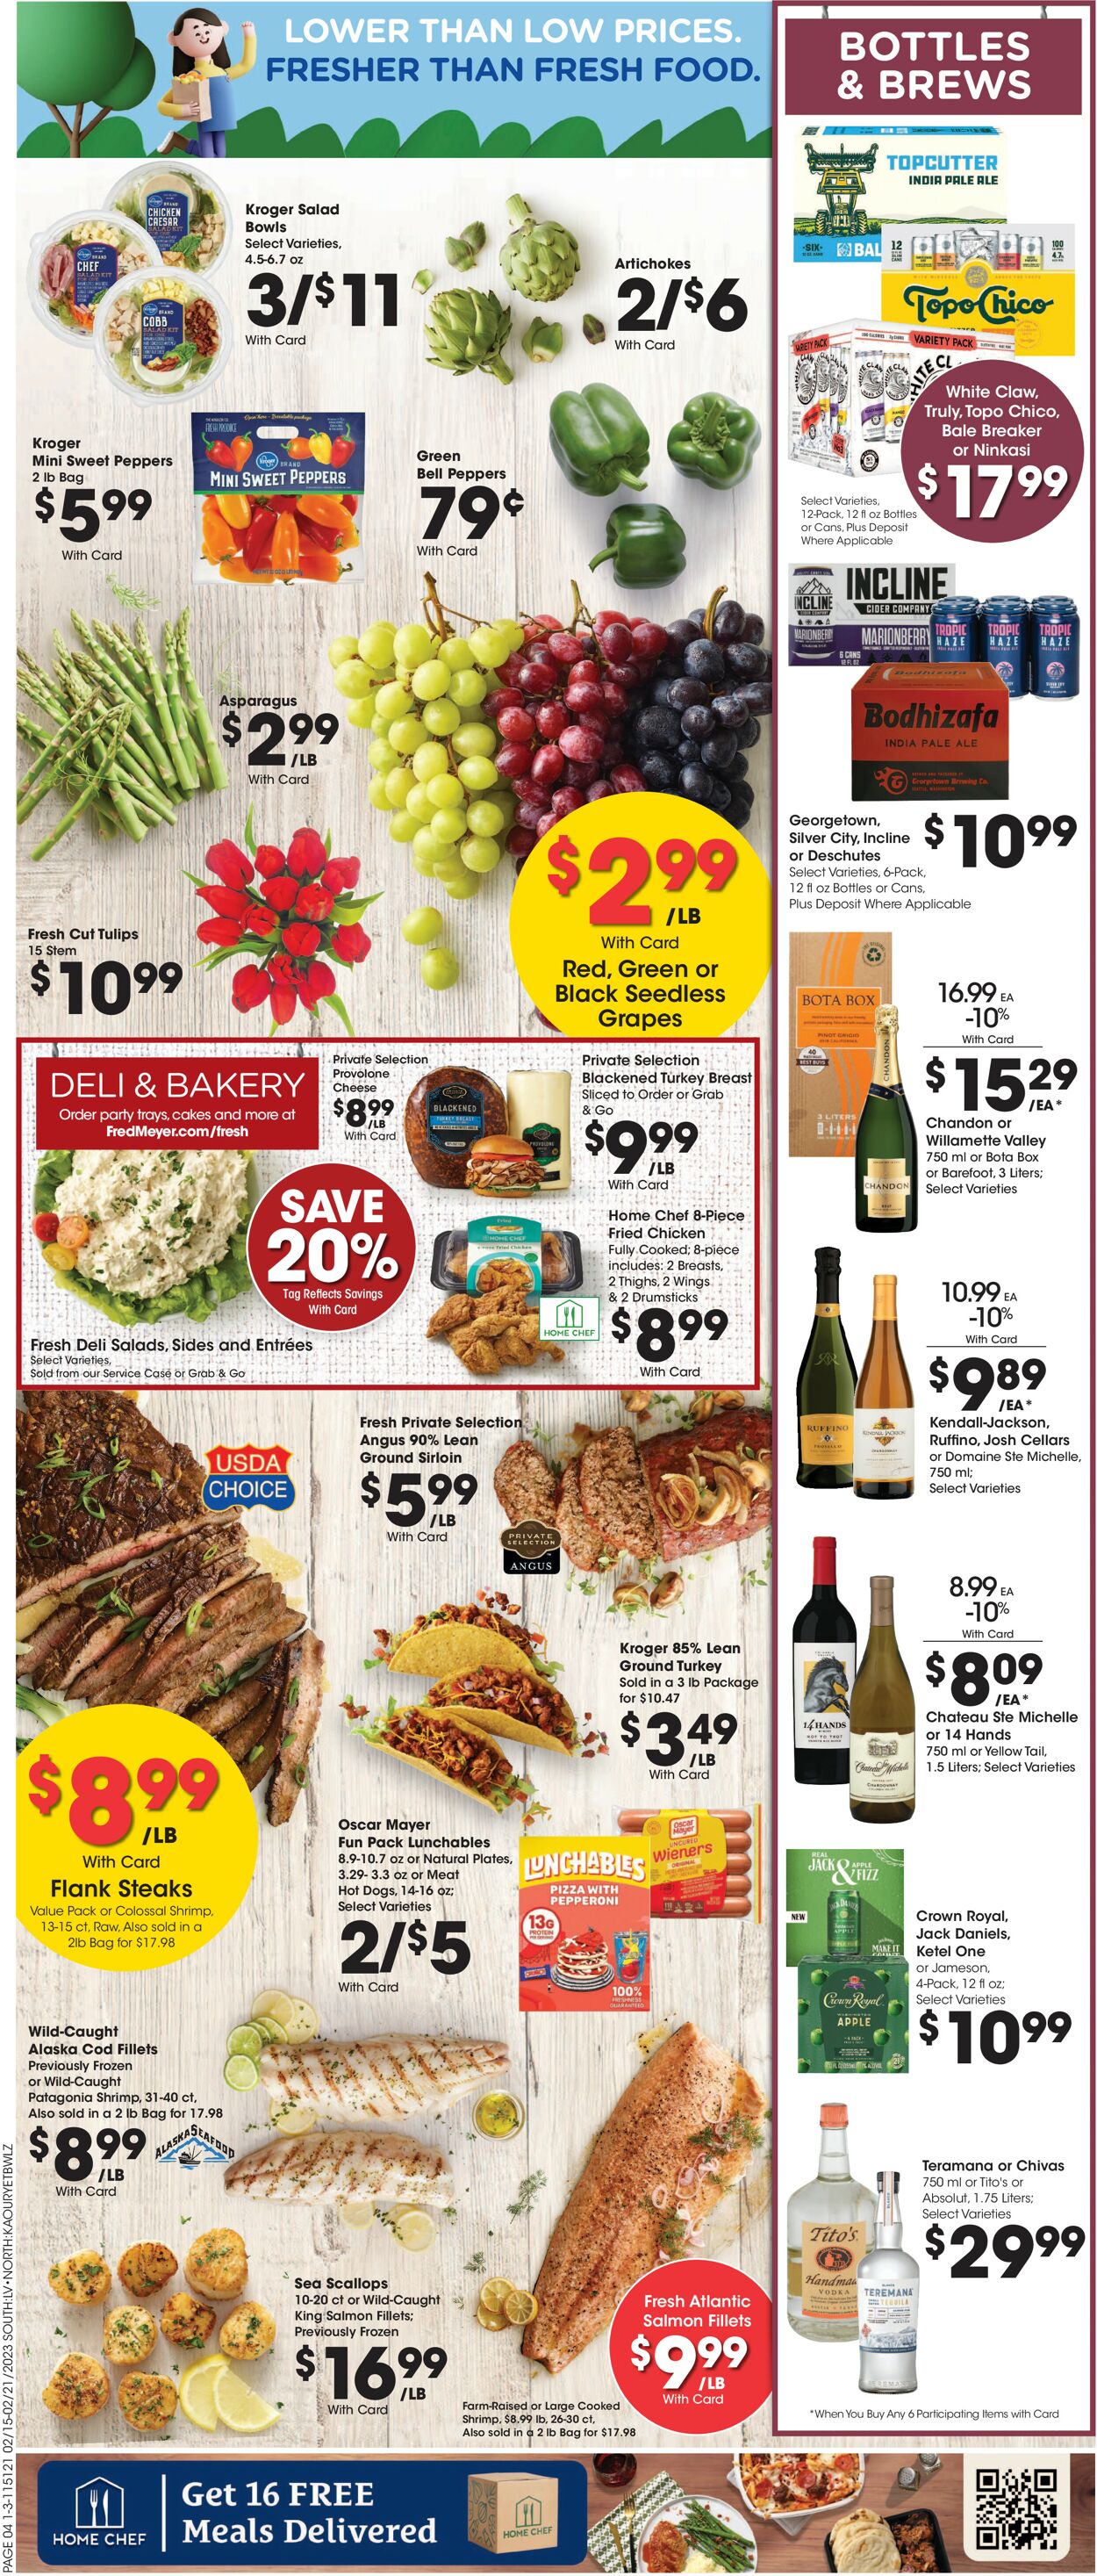 Fred Meyer Weekly Ad Circular - valid 02/15-02/21/2023 (Page 8)